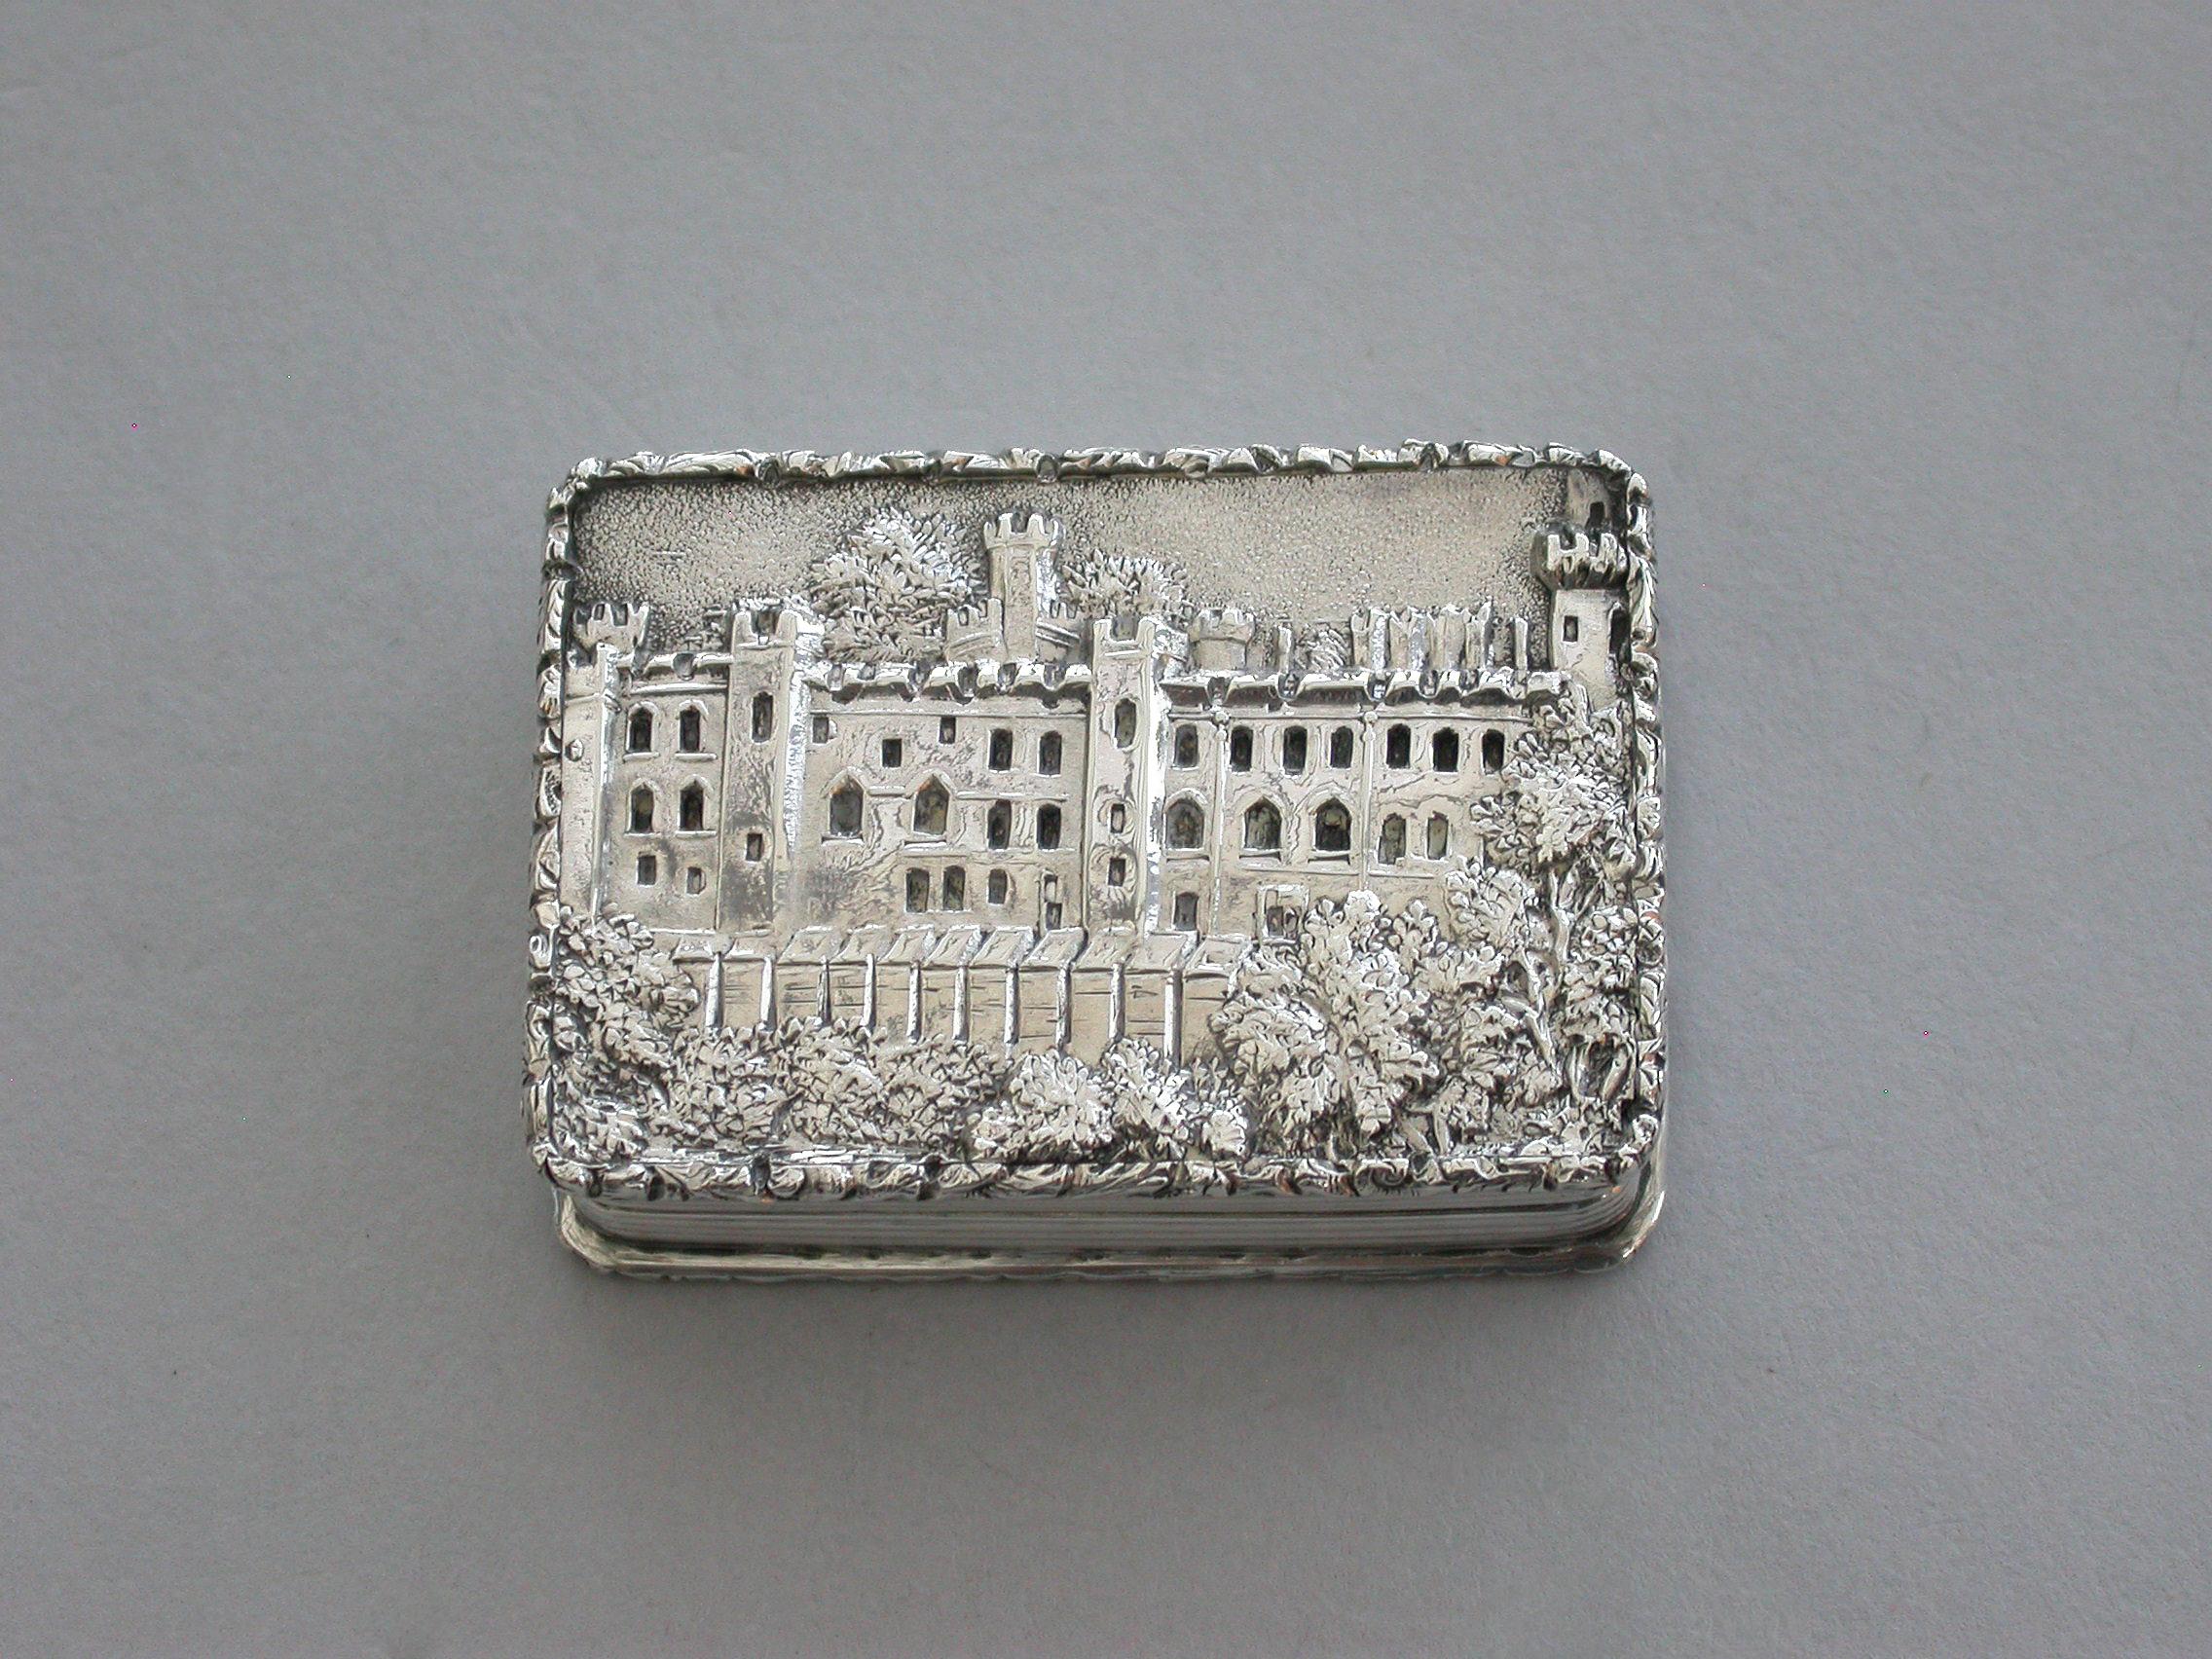 A very fine early Victorian silver 'Castle Top' Vinaigrette, of rectangular form with engine turned decoration to the base and reeded sides, raised foliate borders, the lid depicting a view of Warwick Castle in high relief, silver gilt interior with